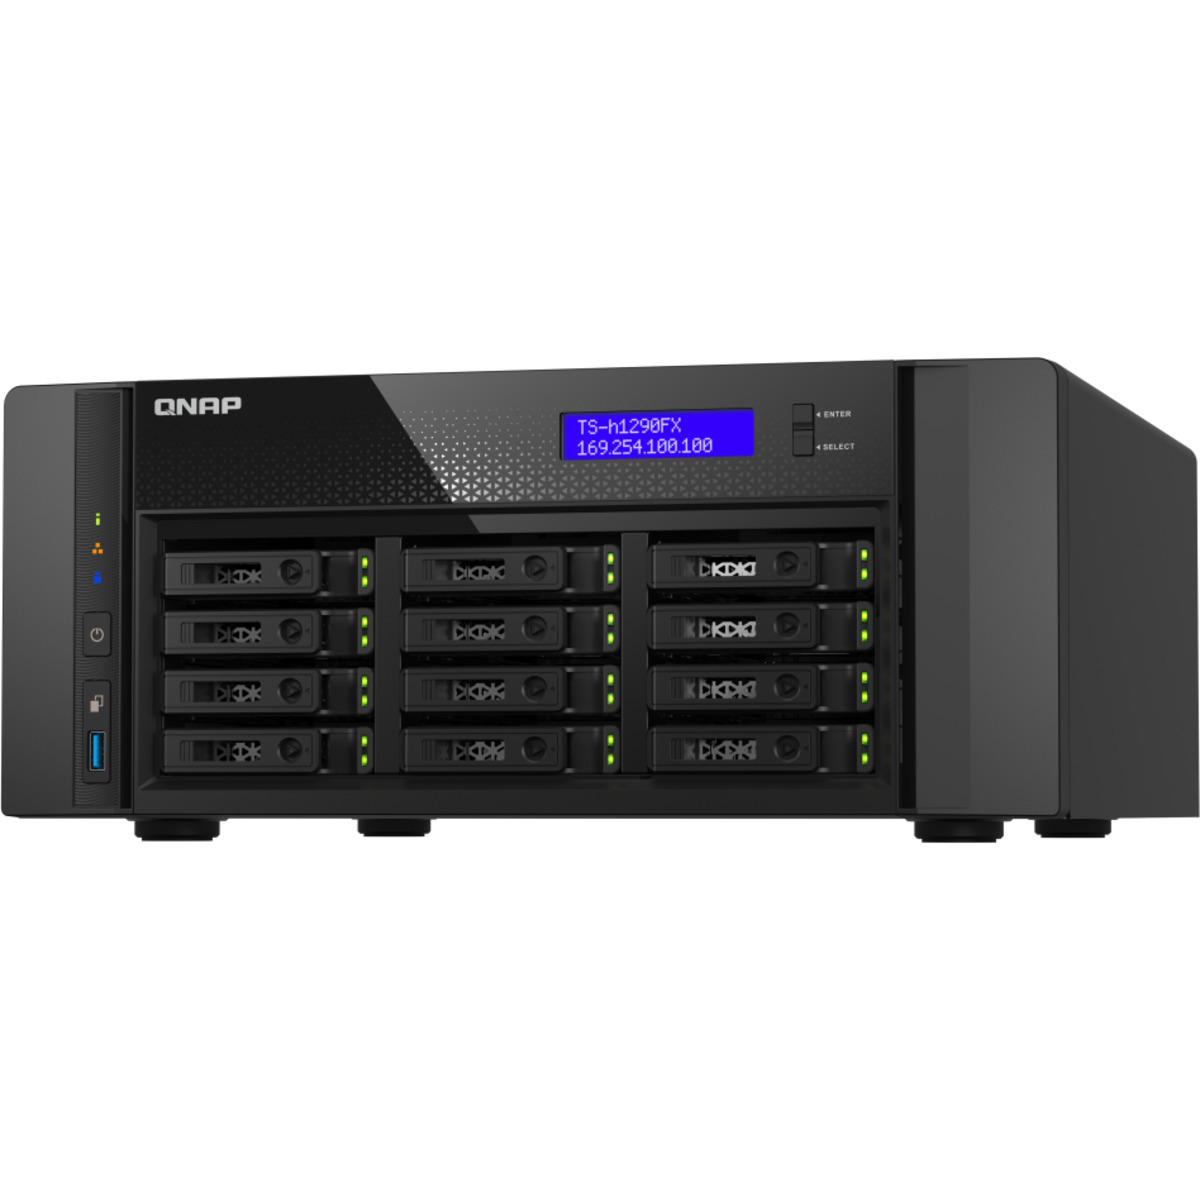 QNAP TS-h1290FX QuTS 7302P hero Edition 48tb 12-Bay Desktop Large Business / Enterprise NAS - Network Attached Storage Device 12x4tb Crucial MX500 CT4000MX500SSD1 2.5 560/510MB/s SATA 6Gb/s SSD CONSUMER Class Drives Installed - Burn-In Tested TS-h1290FX QuTS 7302P hero Edition